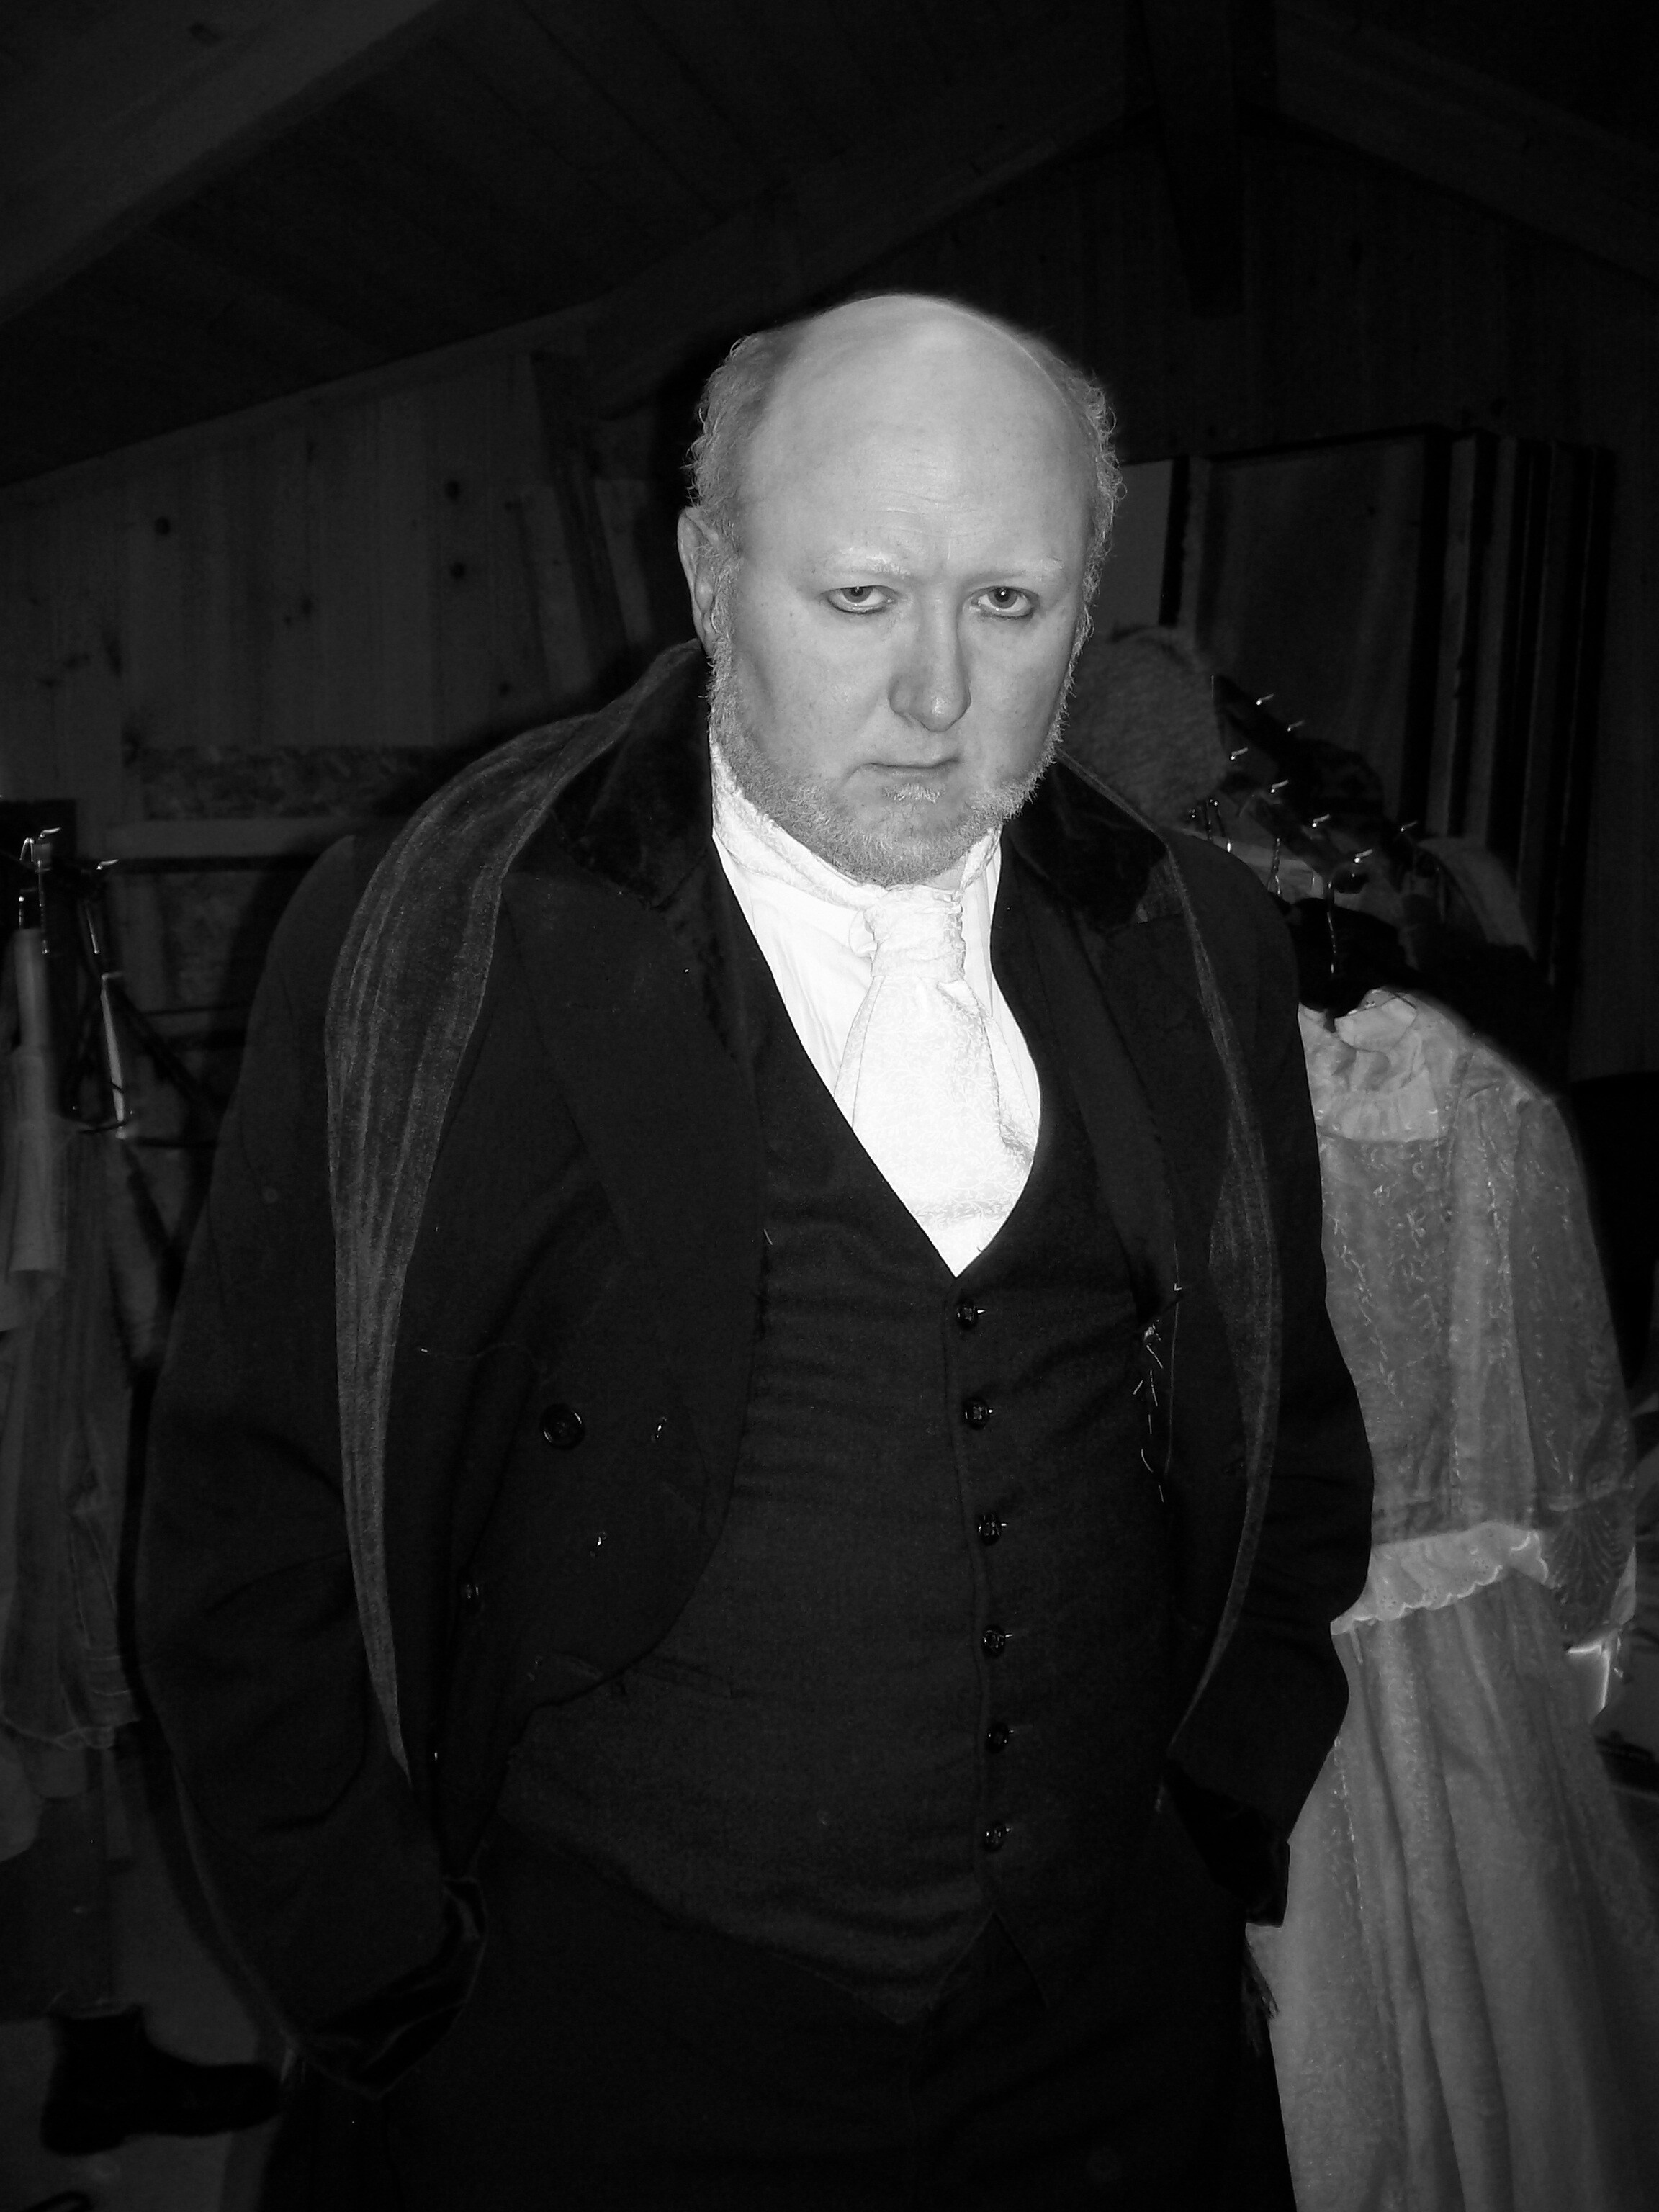 Steve O'Connell as Ebenezer Scrooge in New Curtain's production of A Christmas Carol